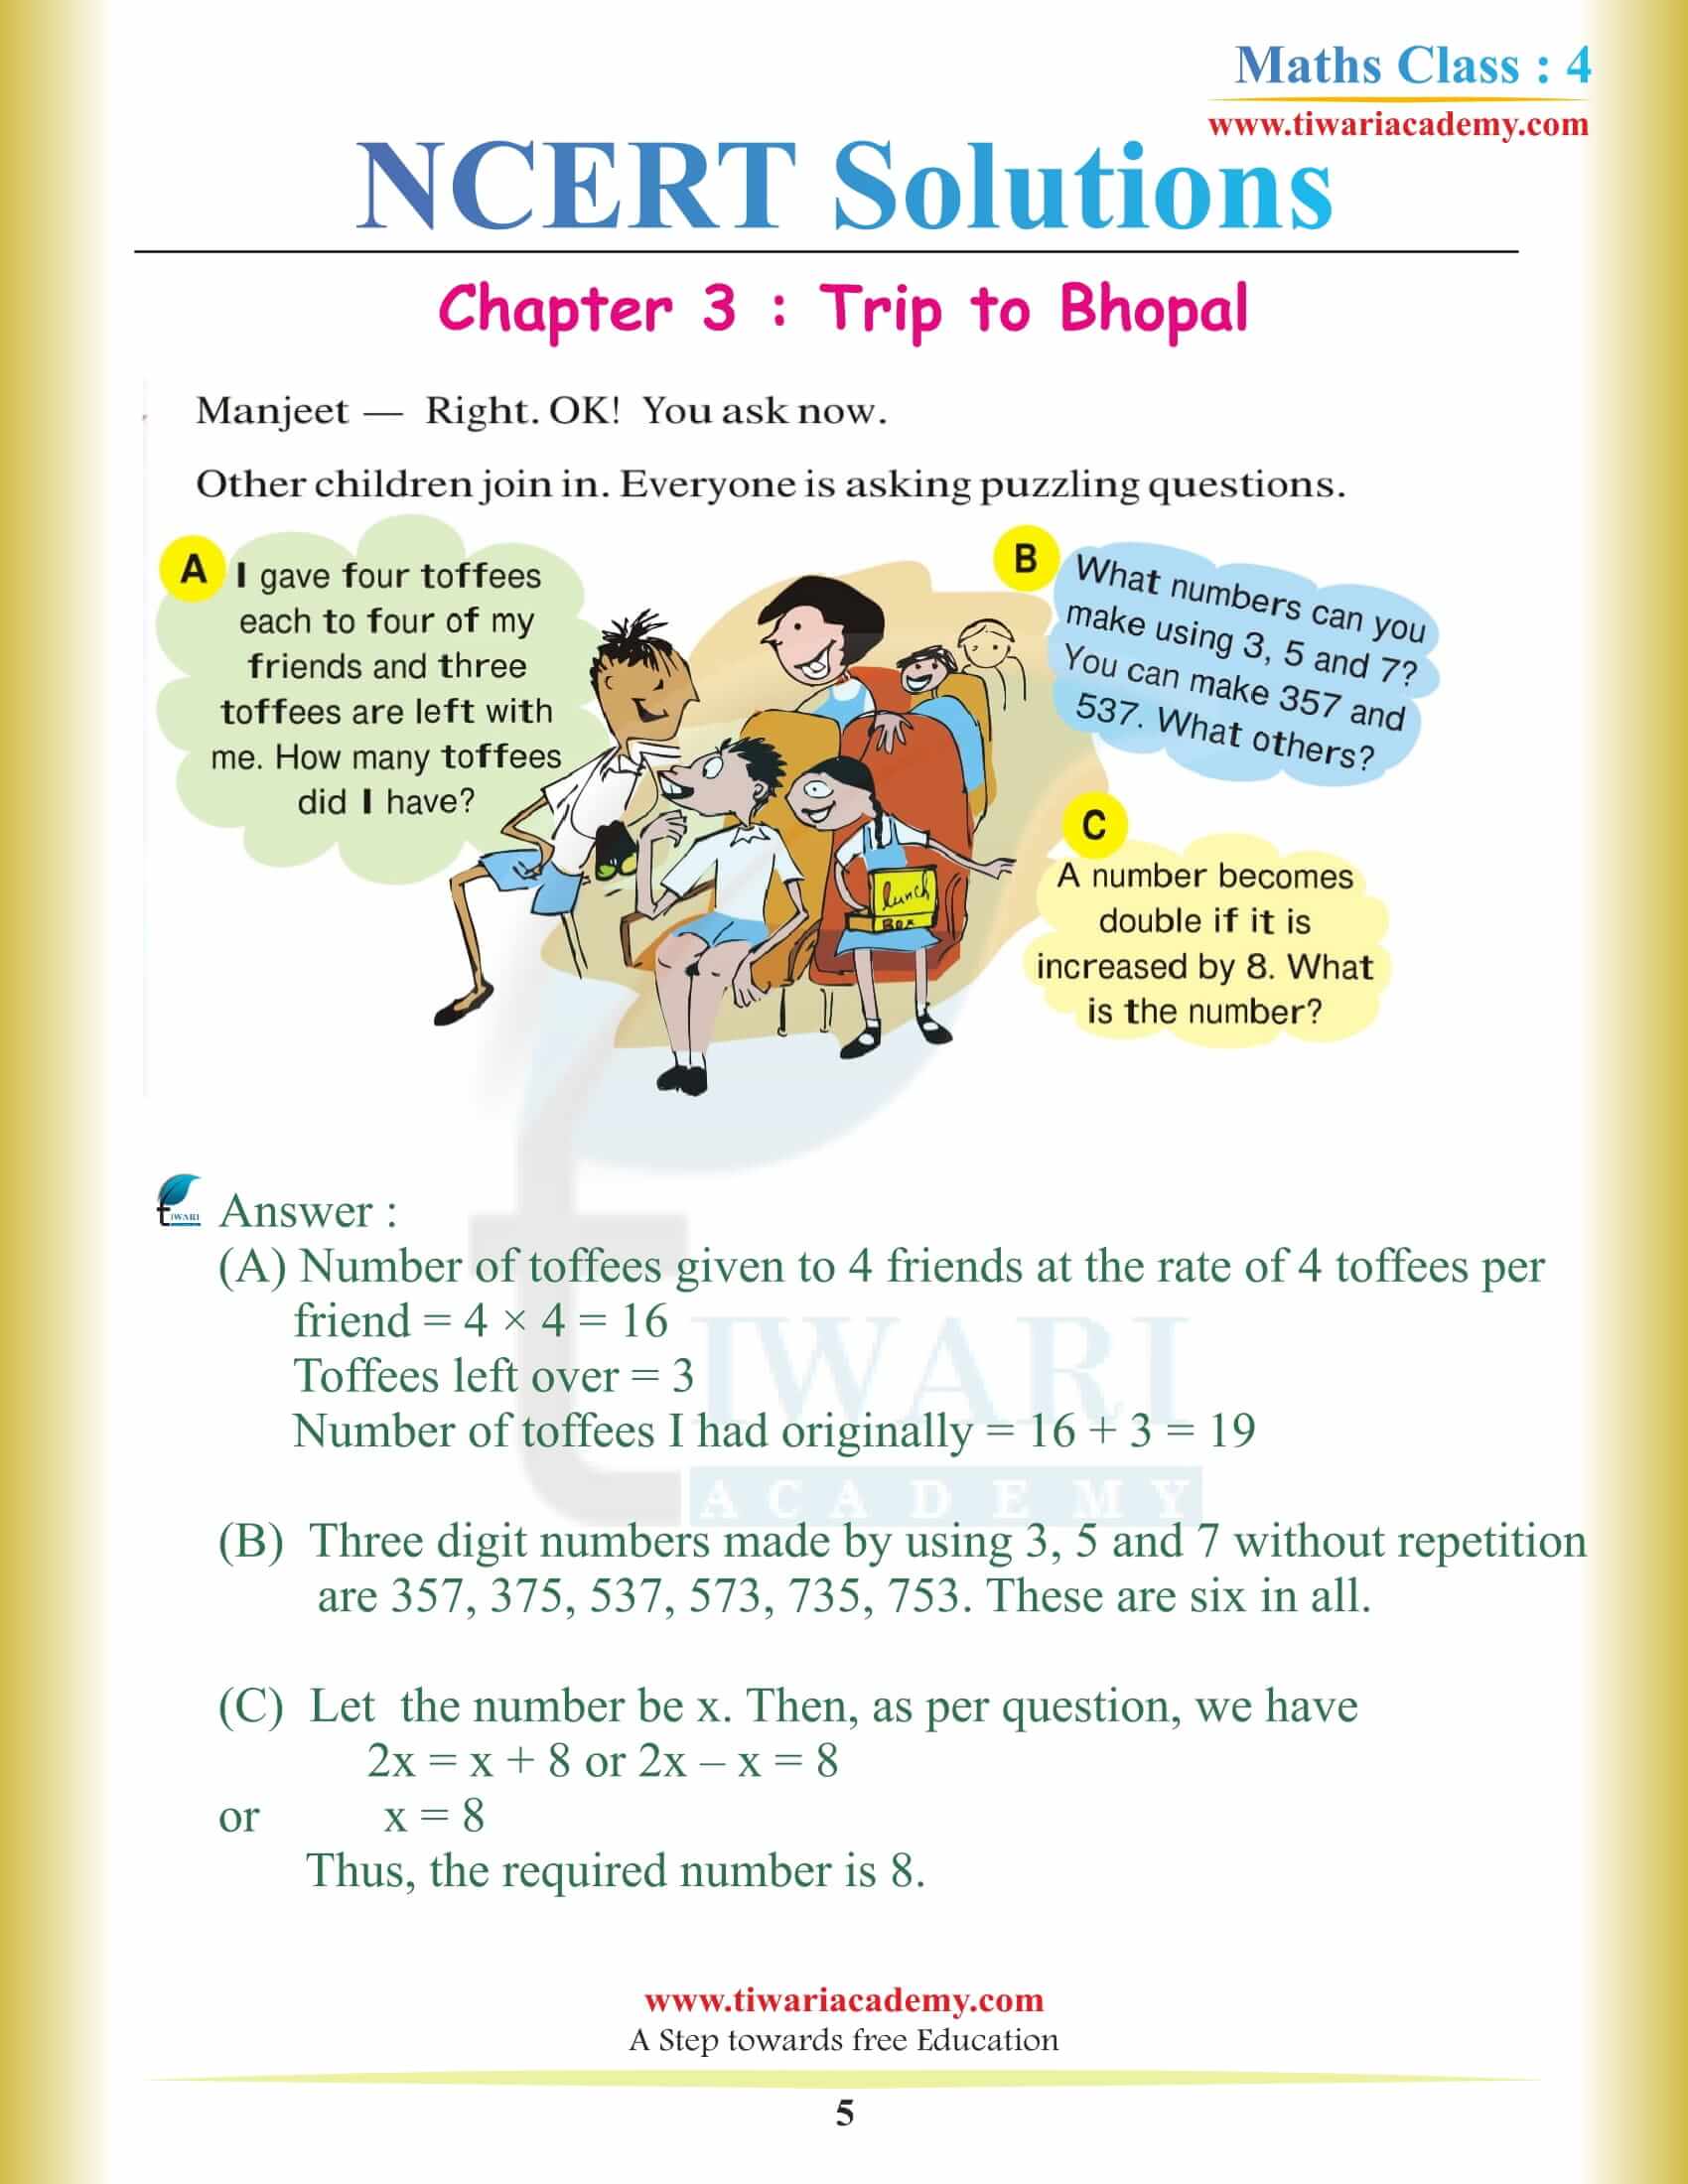 NCERT Solutions for Class 4 Maths Chapter 3 free